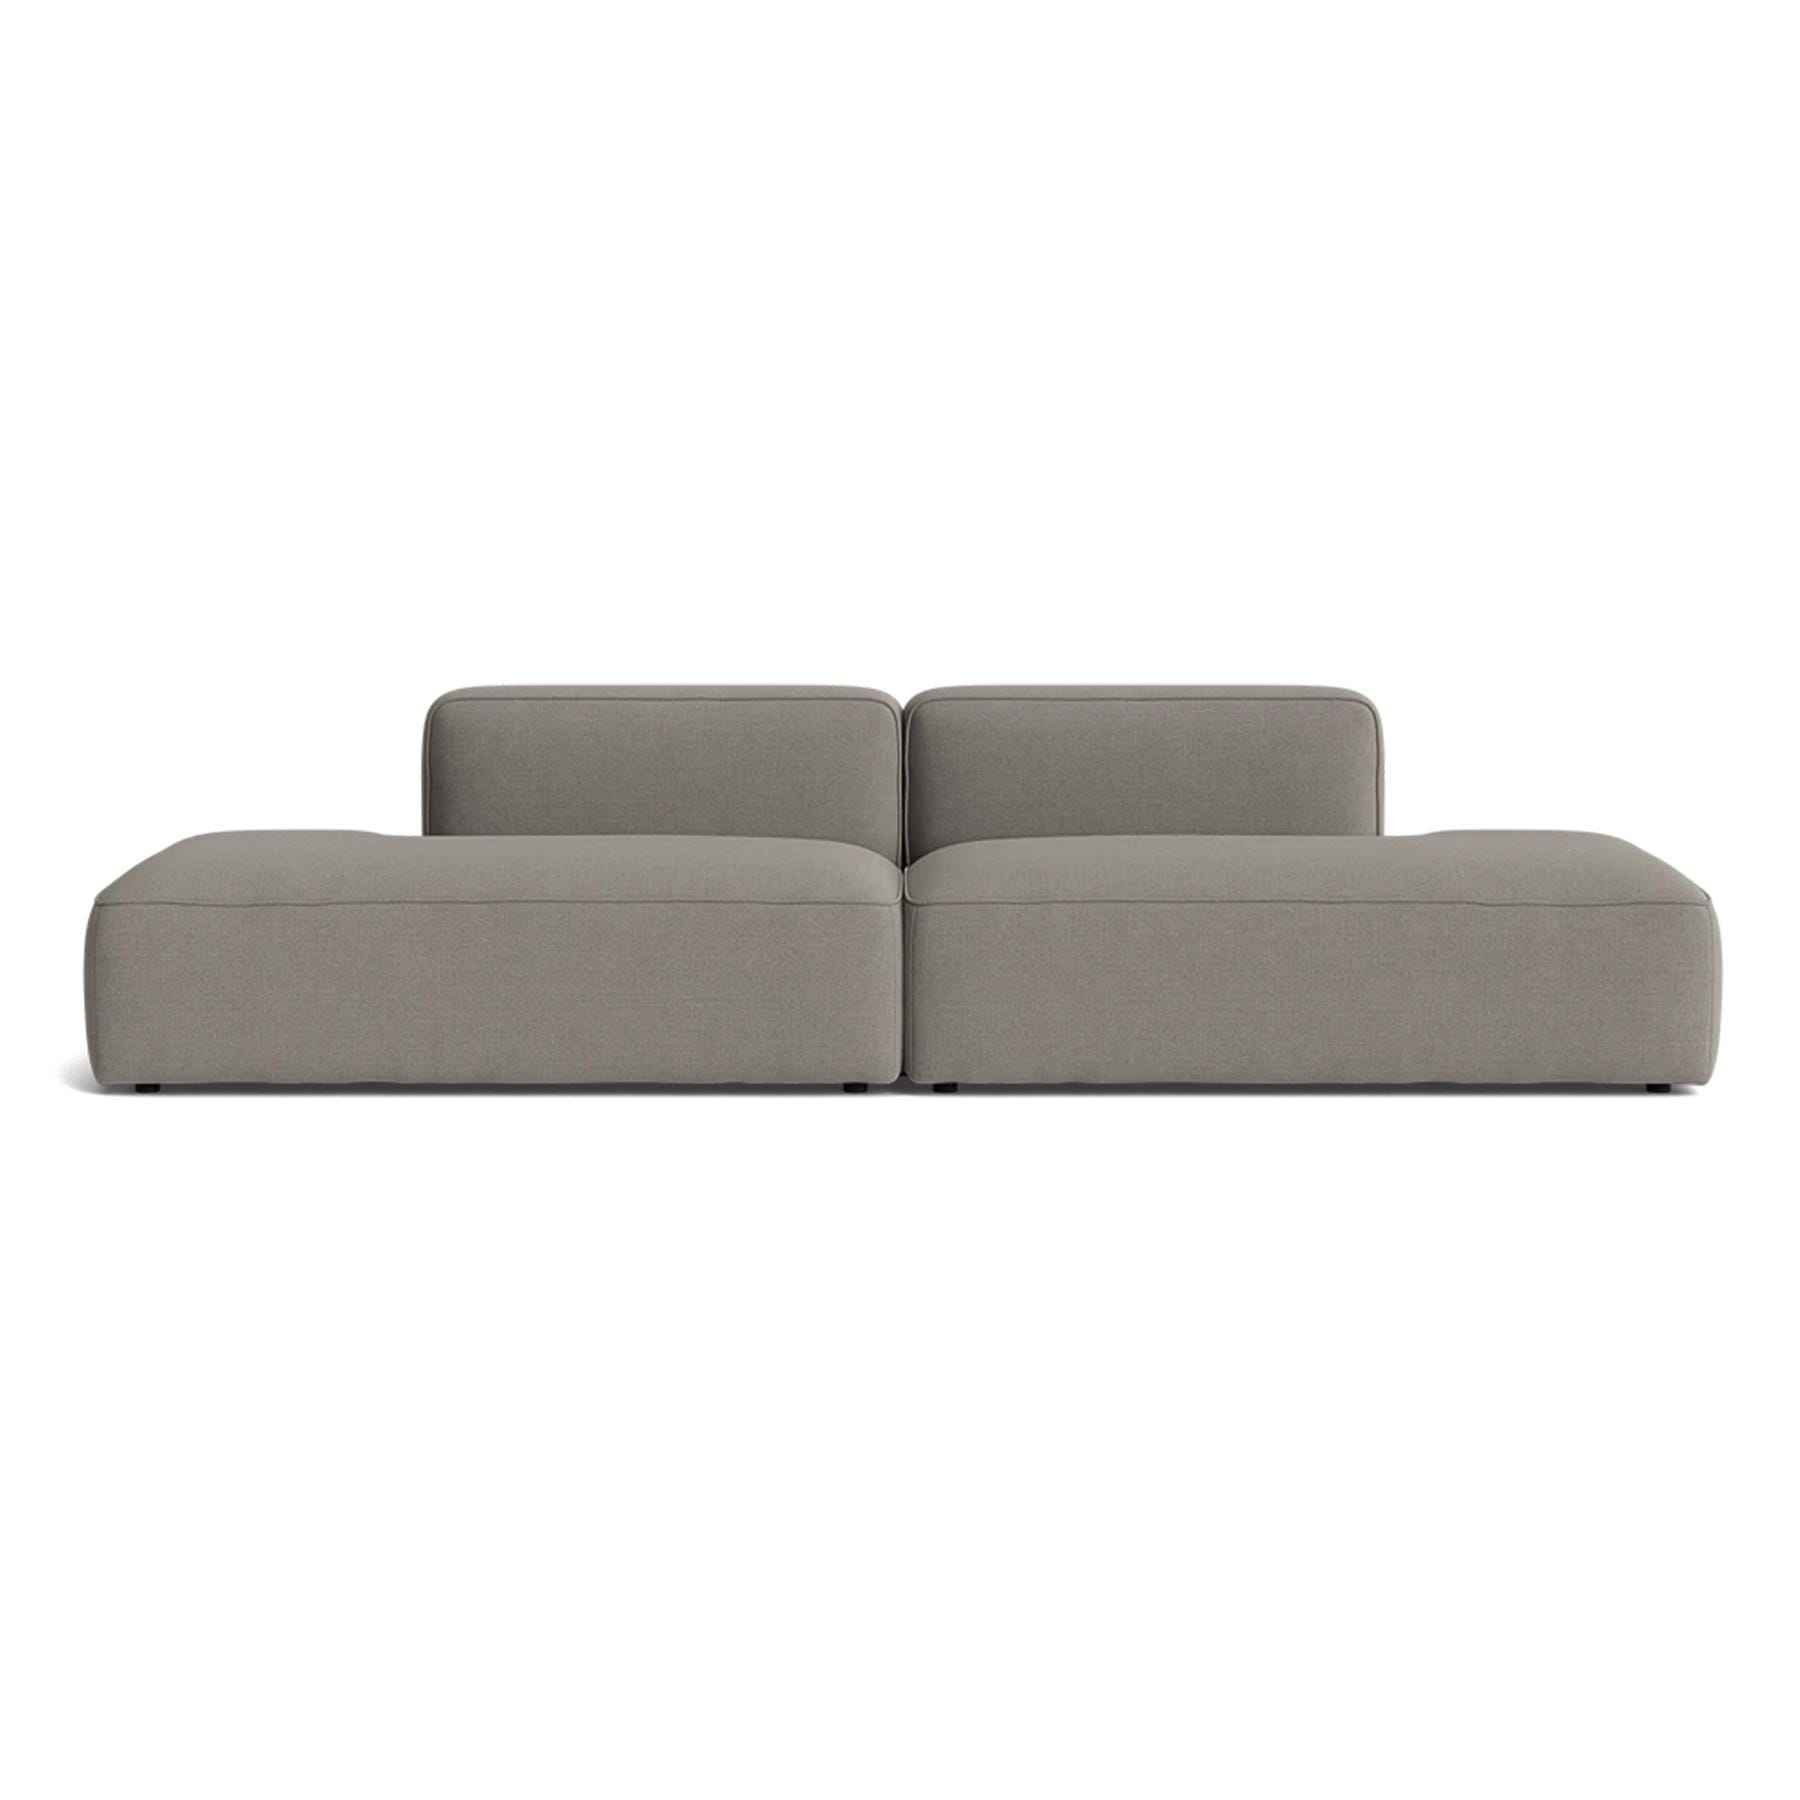 Make Nordic Basecamp Xl Sofa With 2 Open Ends Fiord 262 Brown Designer Furniture From Holloways Of Ludlow